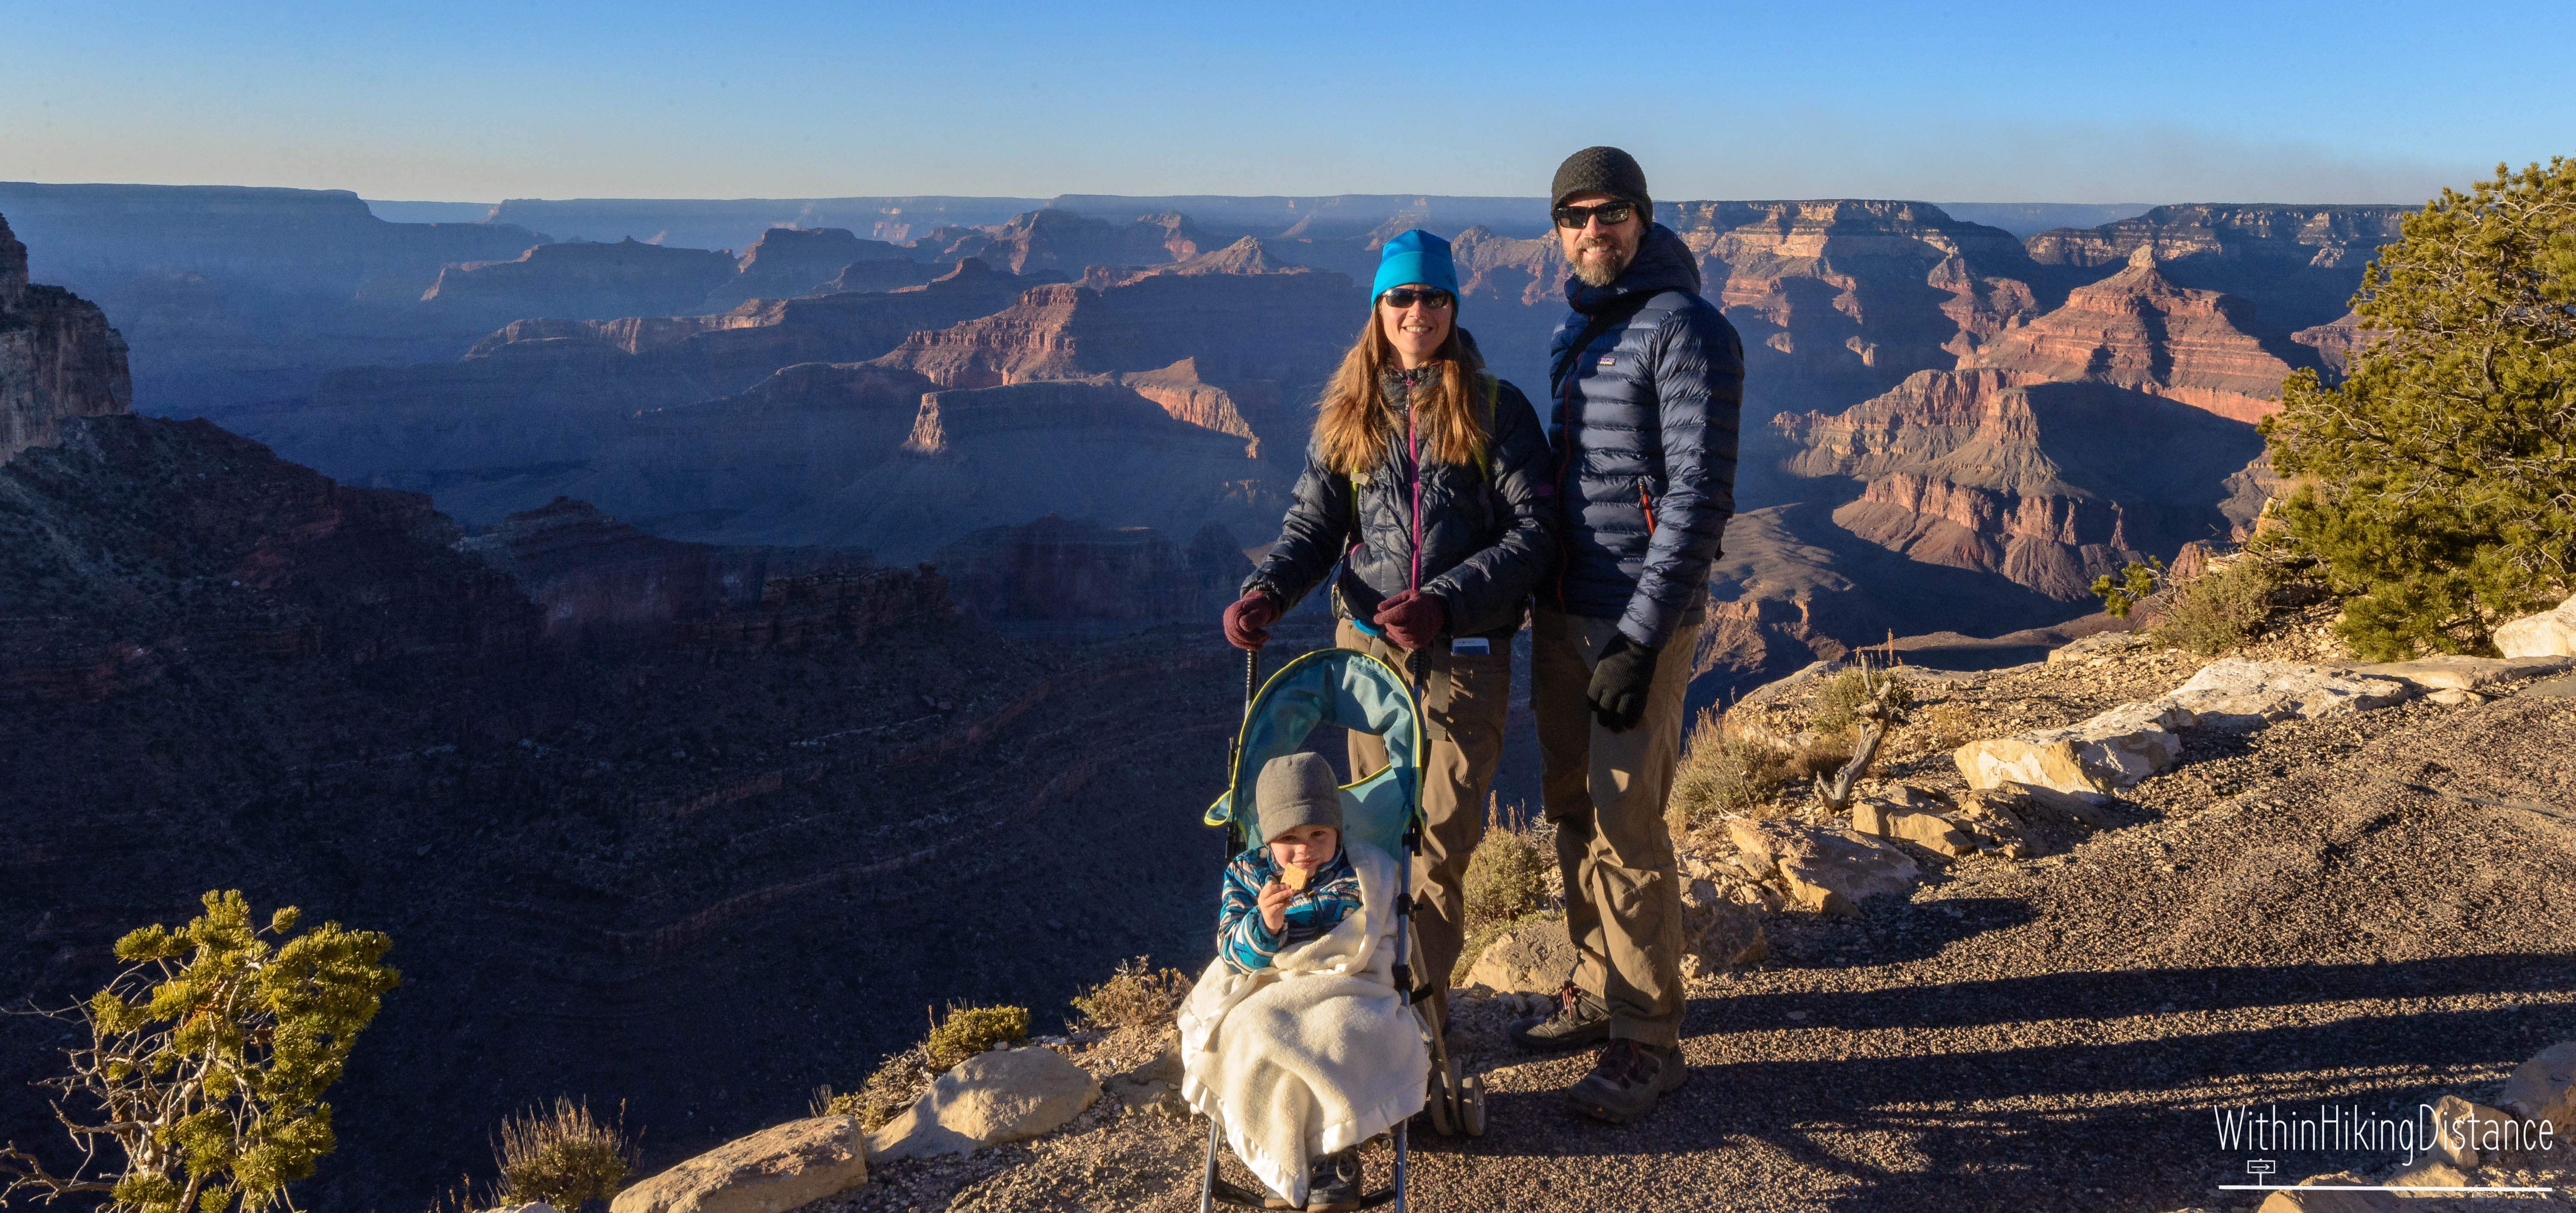 Top 11 one-mile hikes for the whole family in National Parks (Part 1)